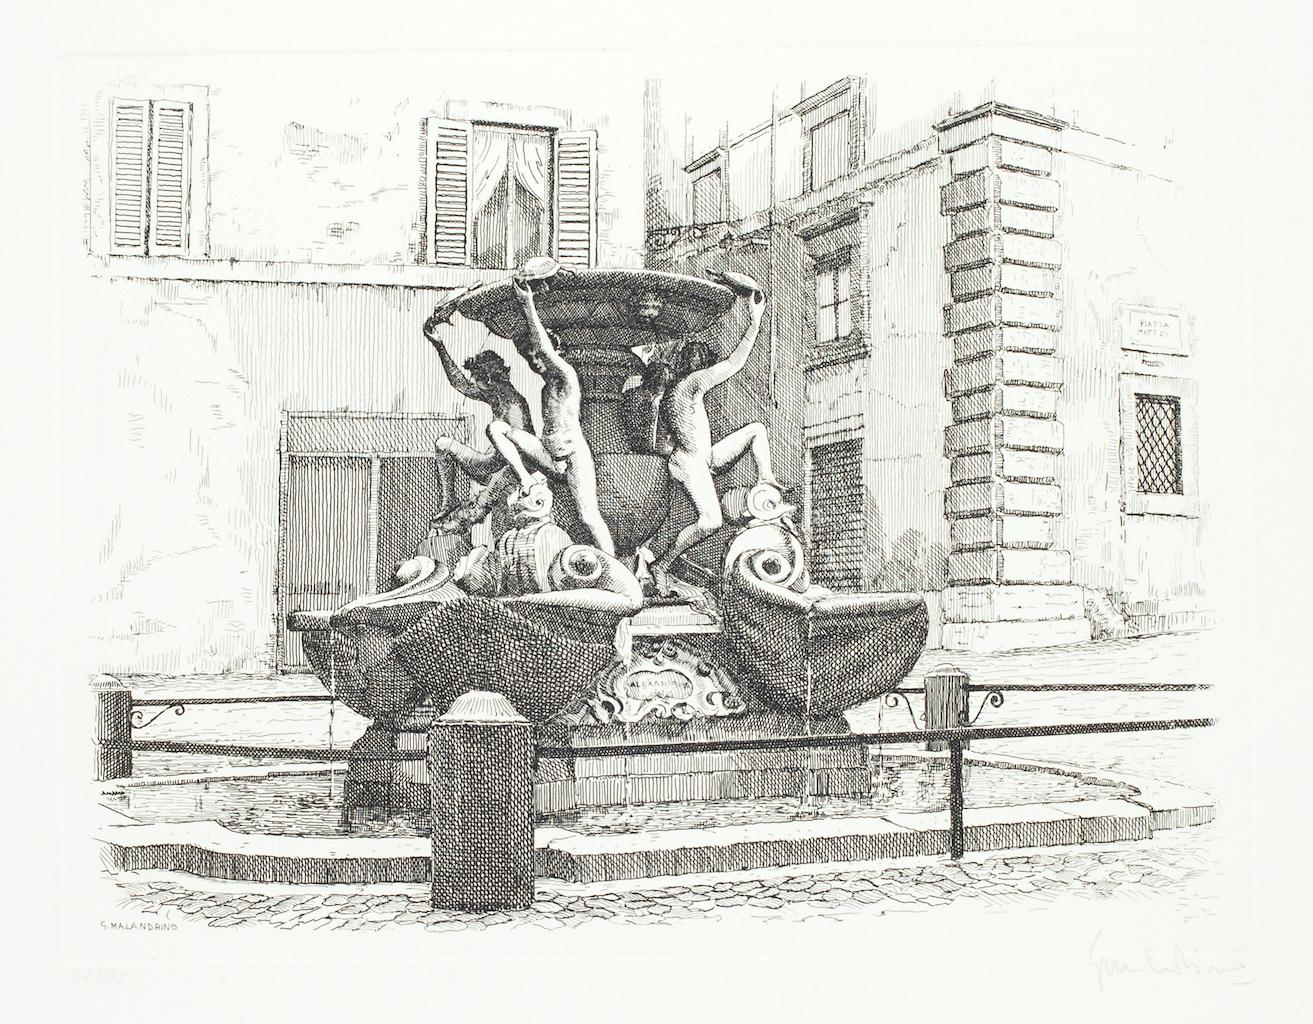 The Fountain of the Turtles is an original artwork realized by Giuseppe Malandrino.

Original print in etching technique.

Hand-signed by the artist in pencil on the lower right corner. Numbered on the lower-left corner. Edition 91/199.

Good